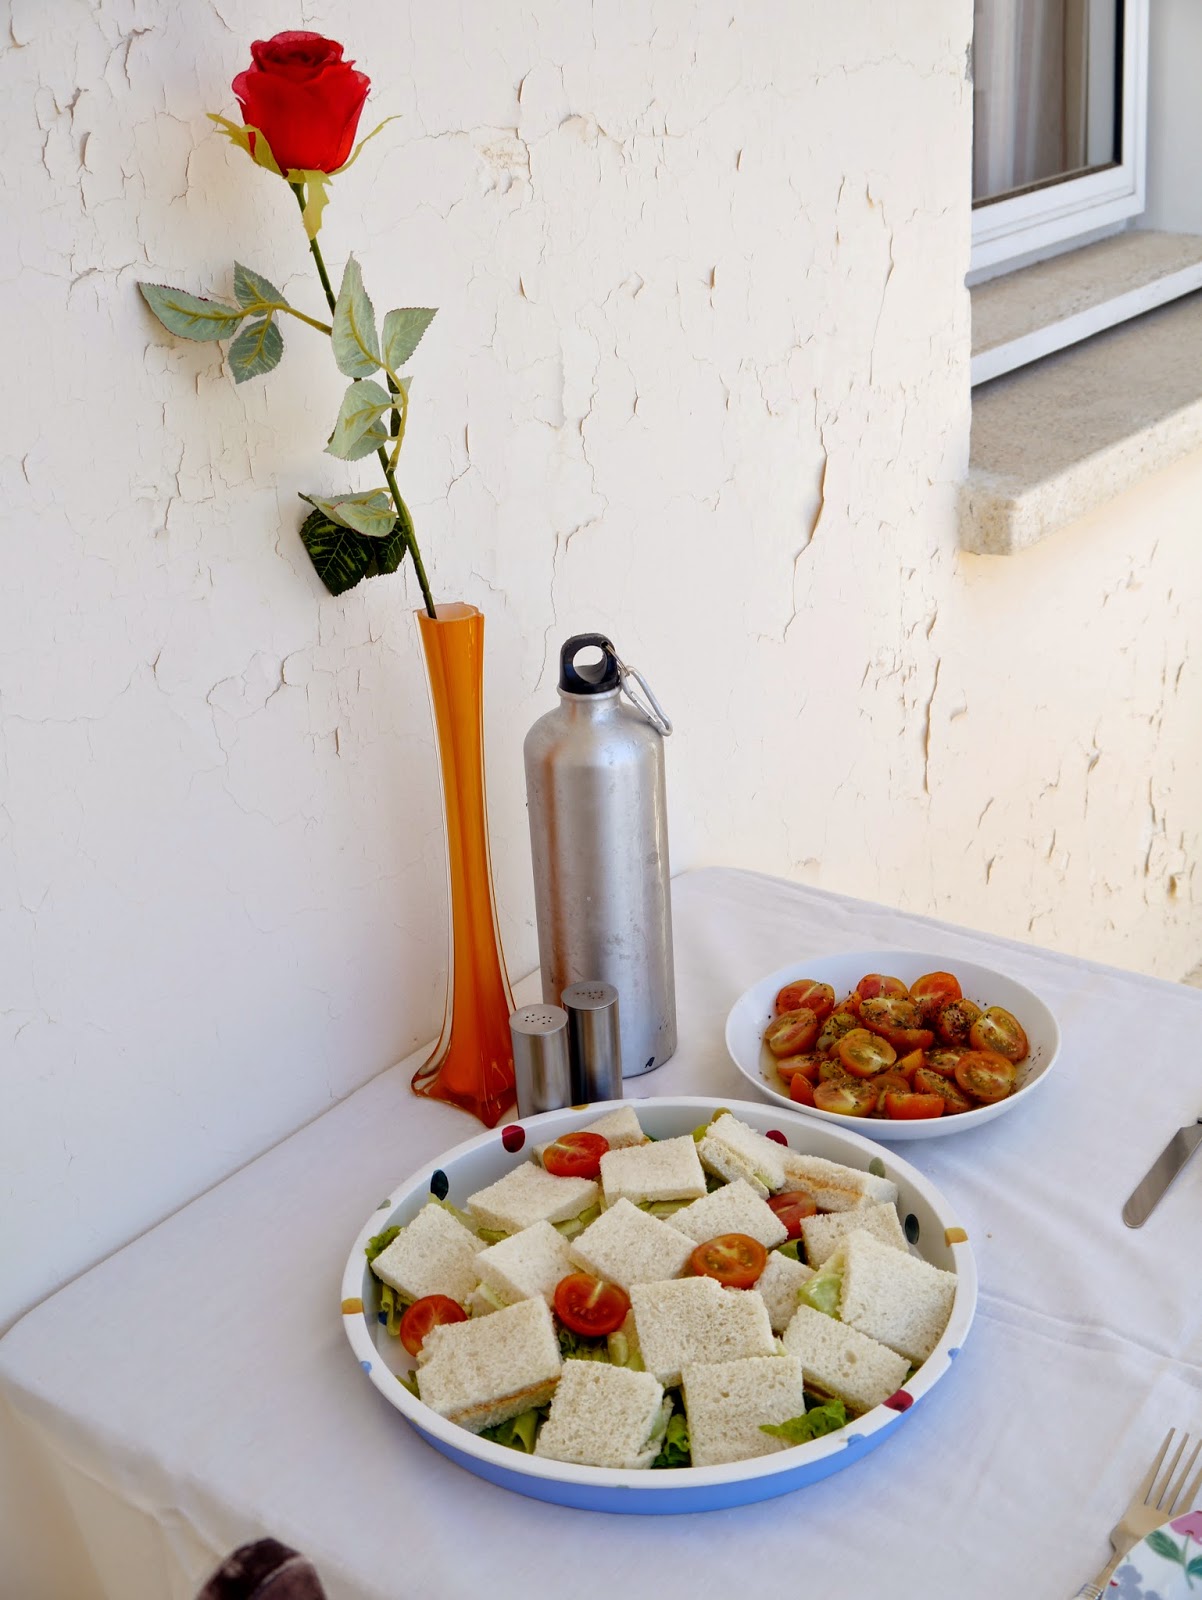 sandwiches, tomatoes and fake rose in vase